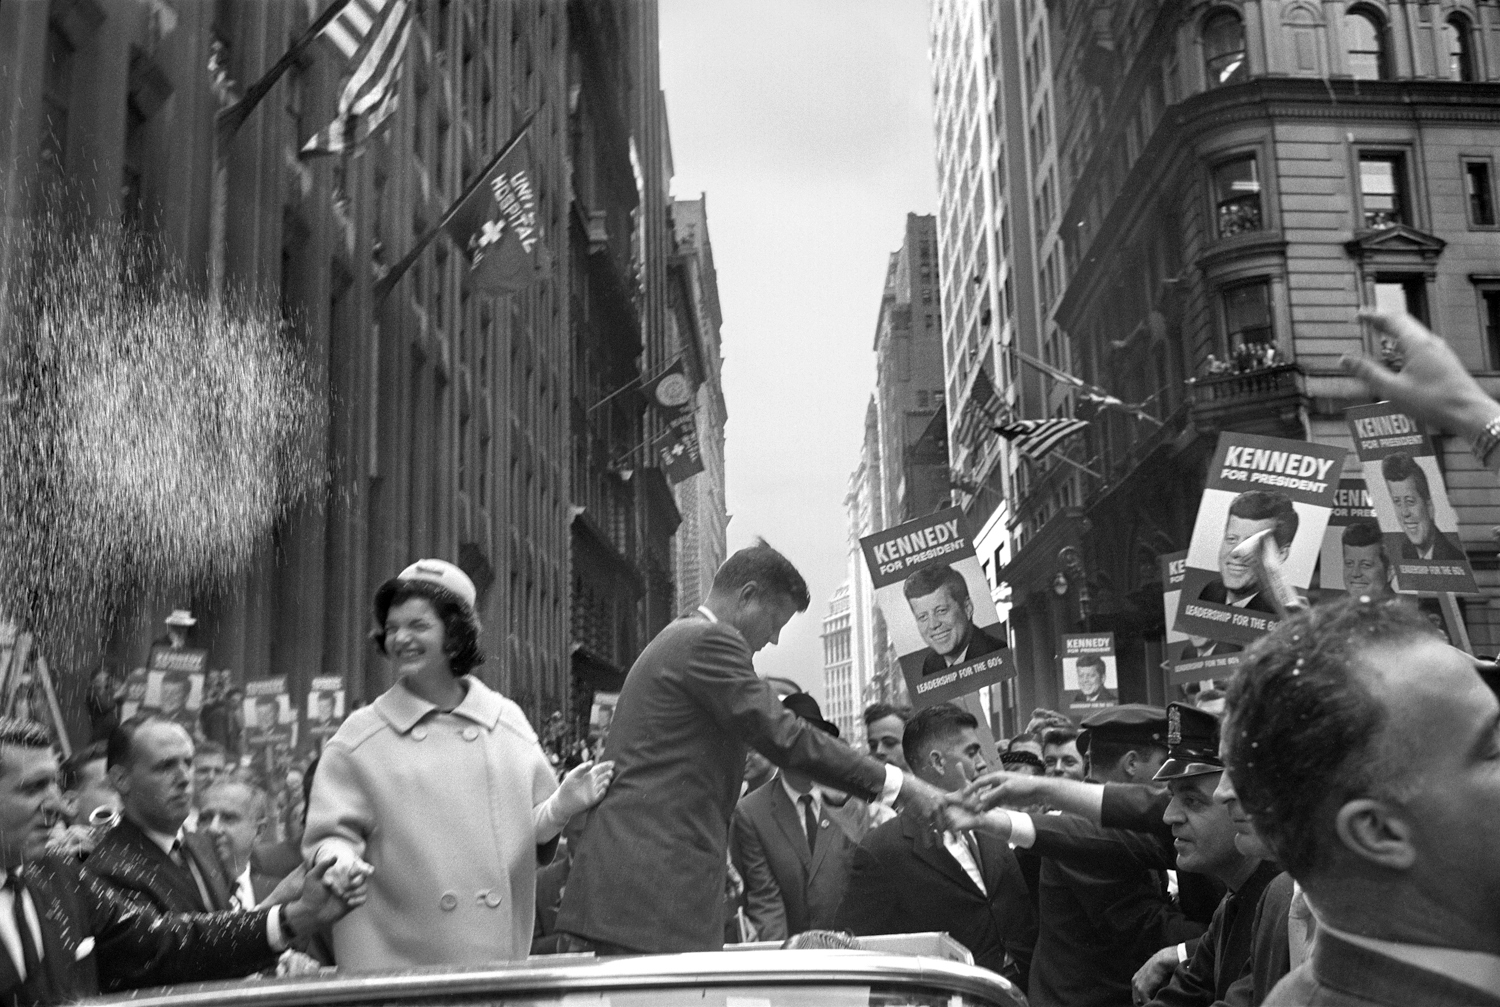 John F. Kennedy and his wife, Jackie, campaigning in New York, Oct. 19, 1960.